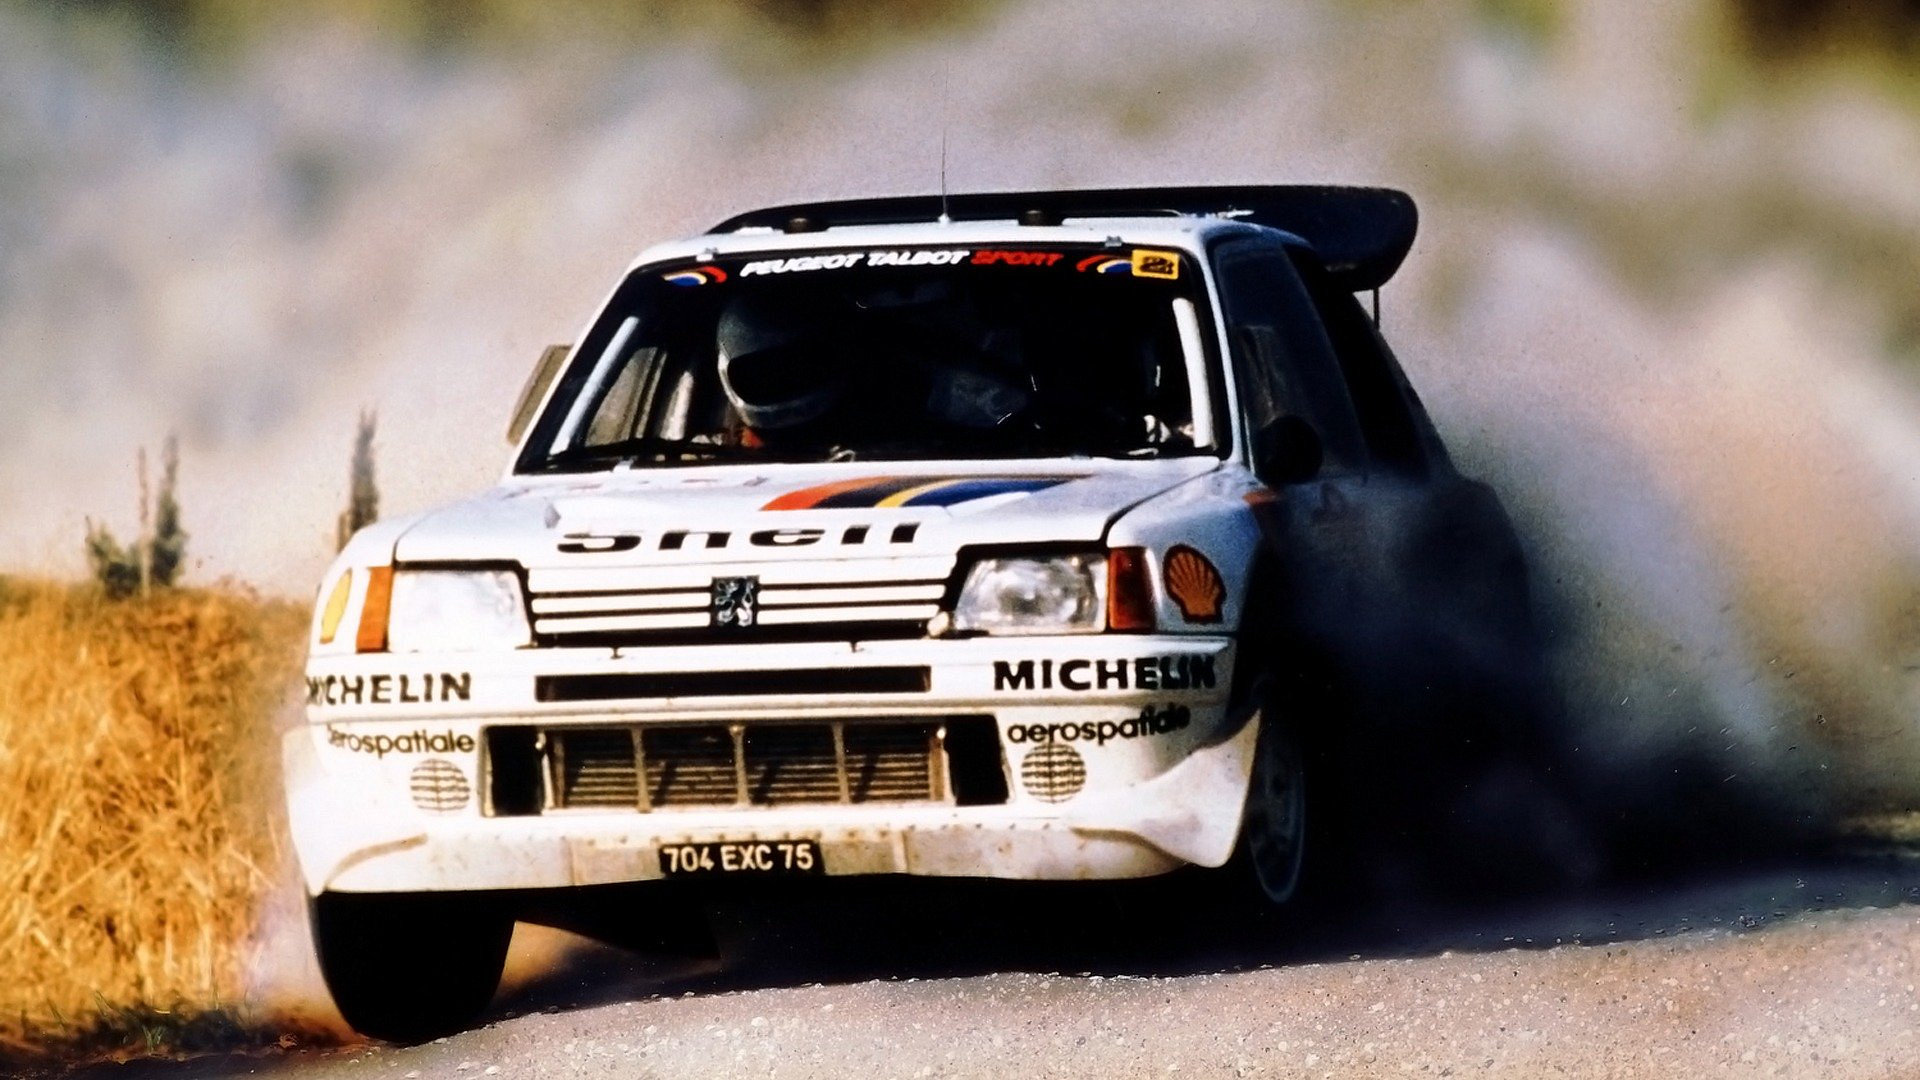 Riding Balls of Fire - The Wildest Years of Rallying